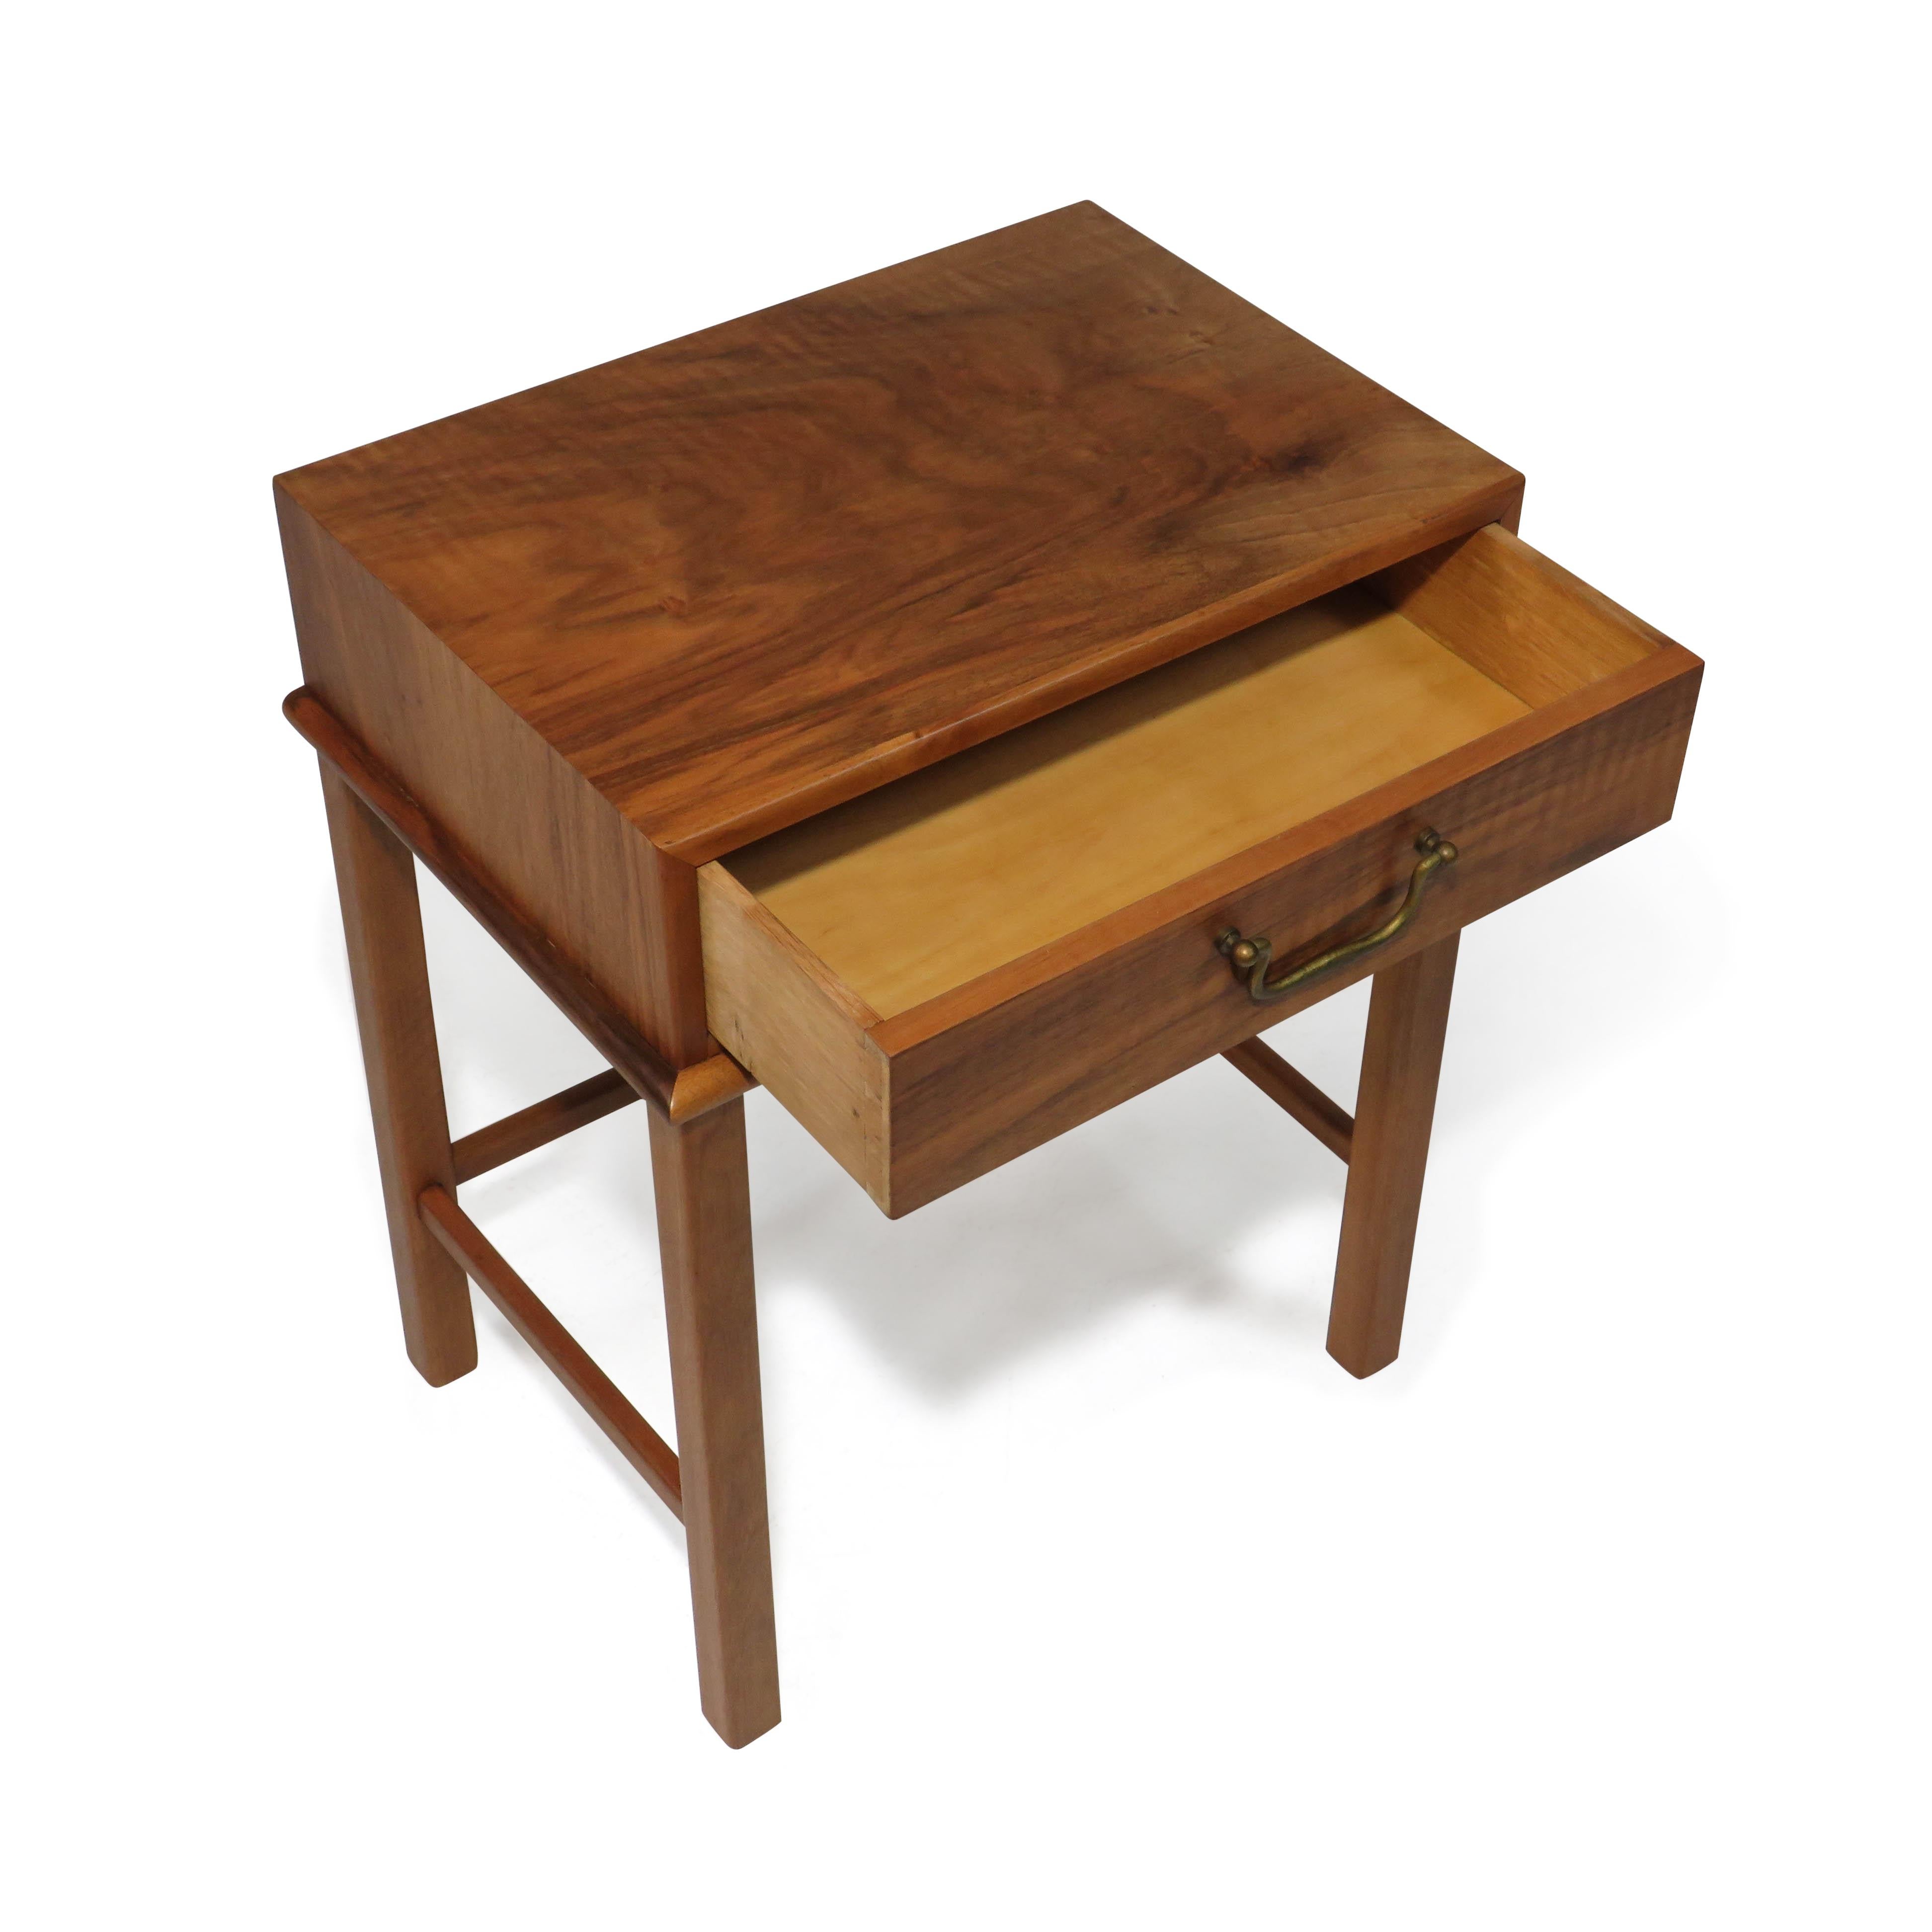 1930's Walnut Nightstand Side Table In Excellent Condition For Sale In Oakland, CA